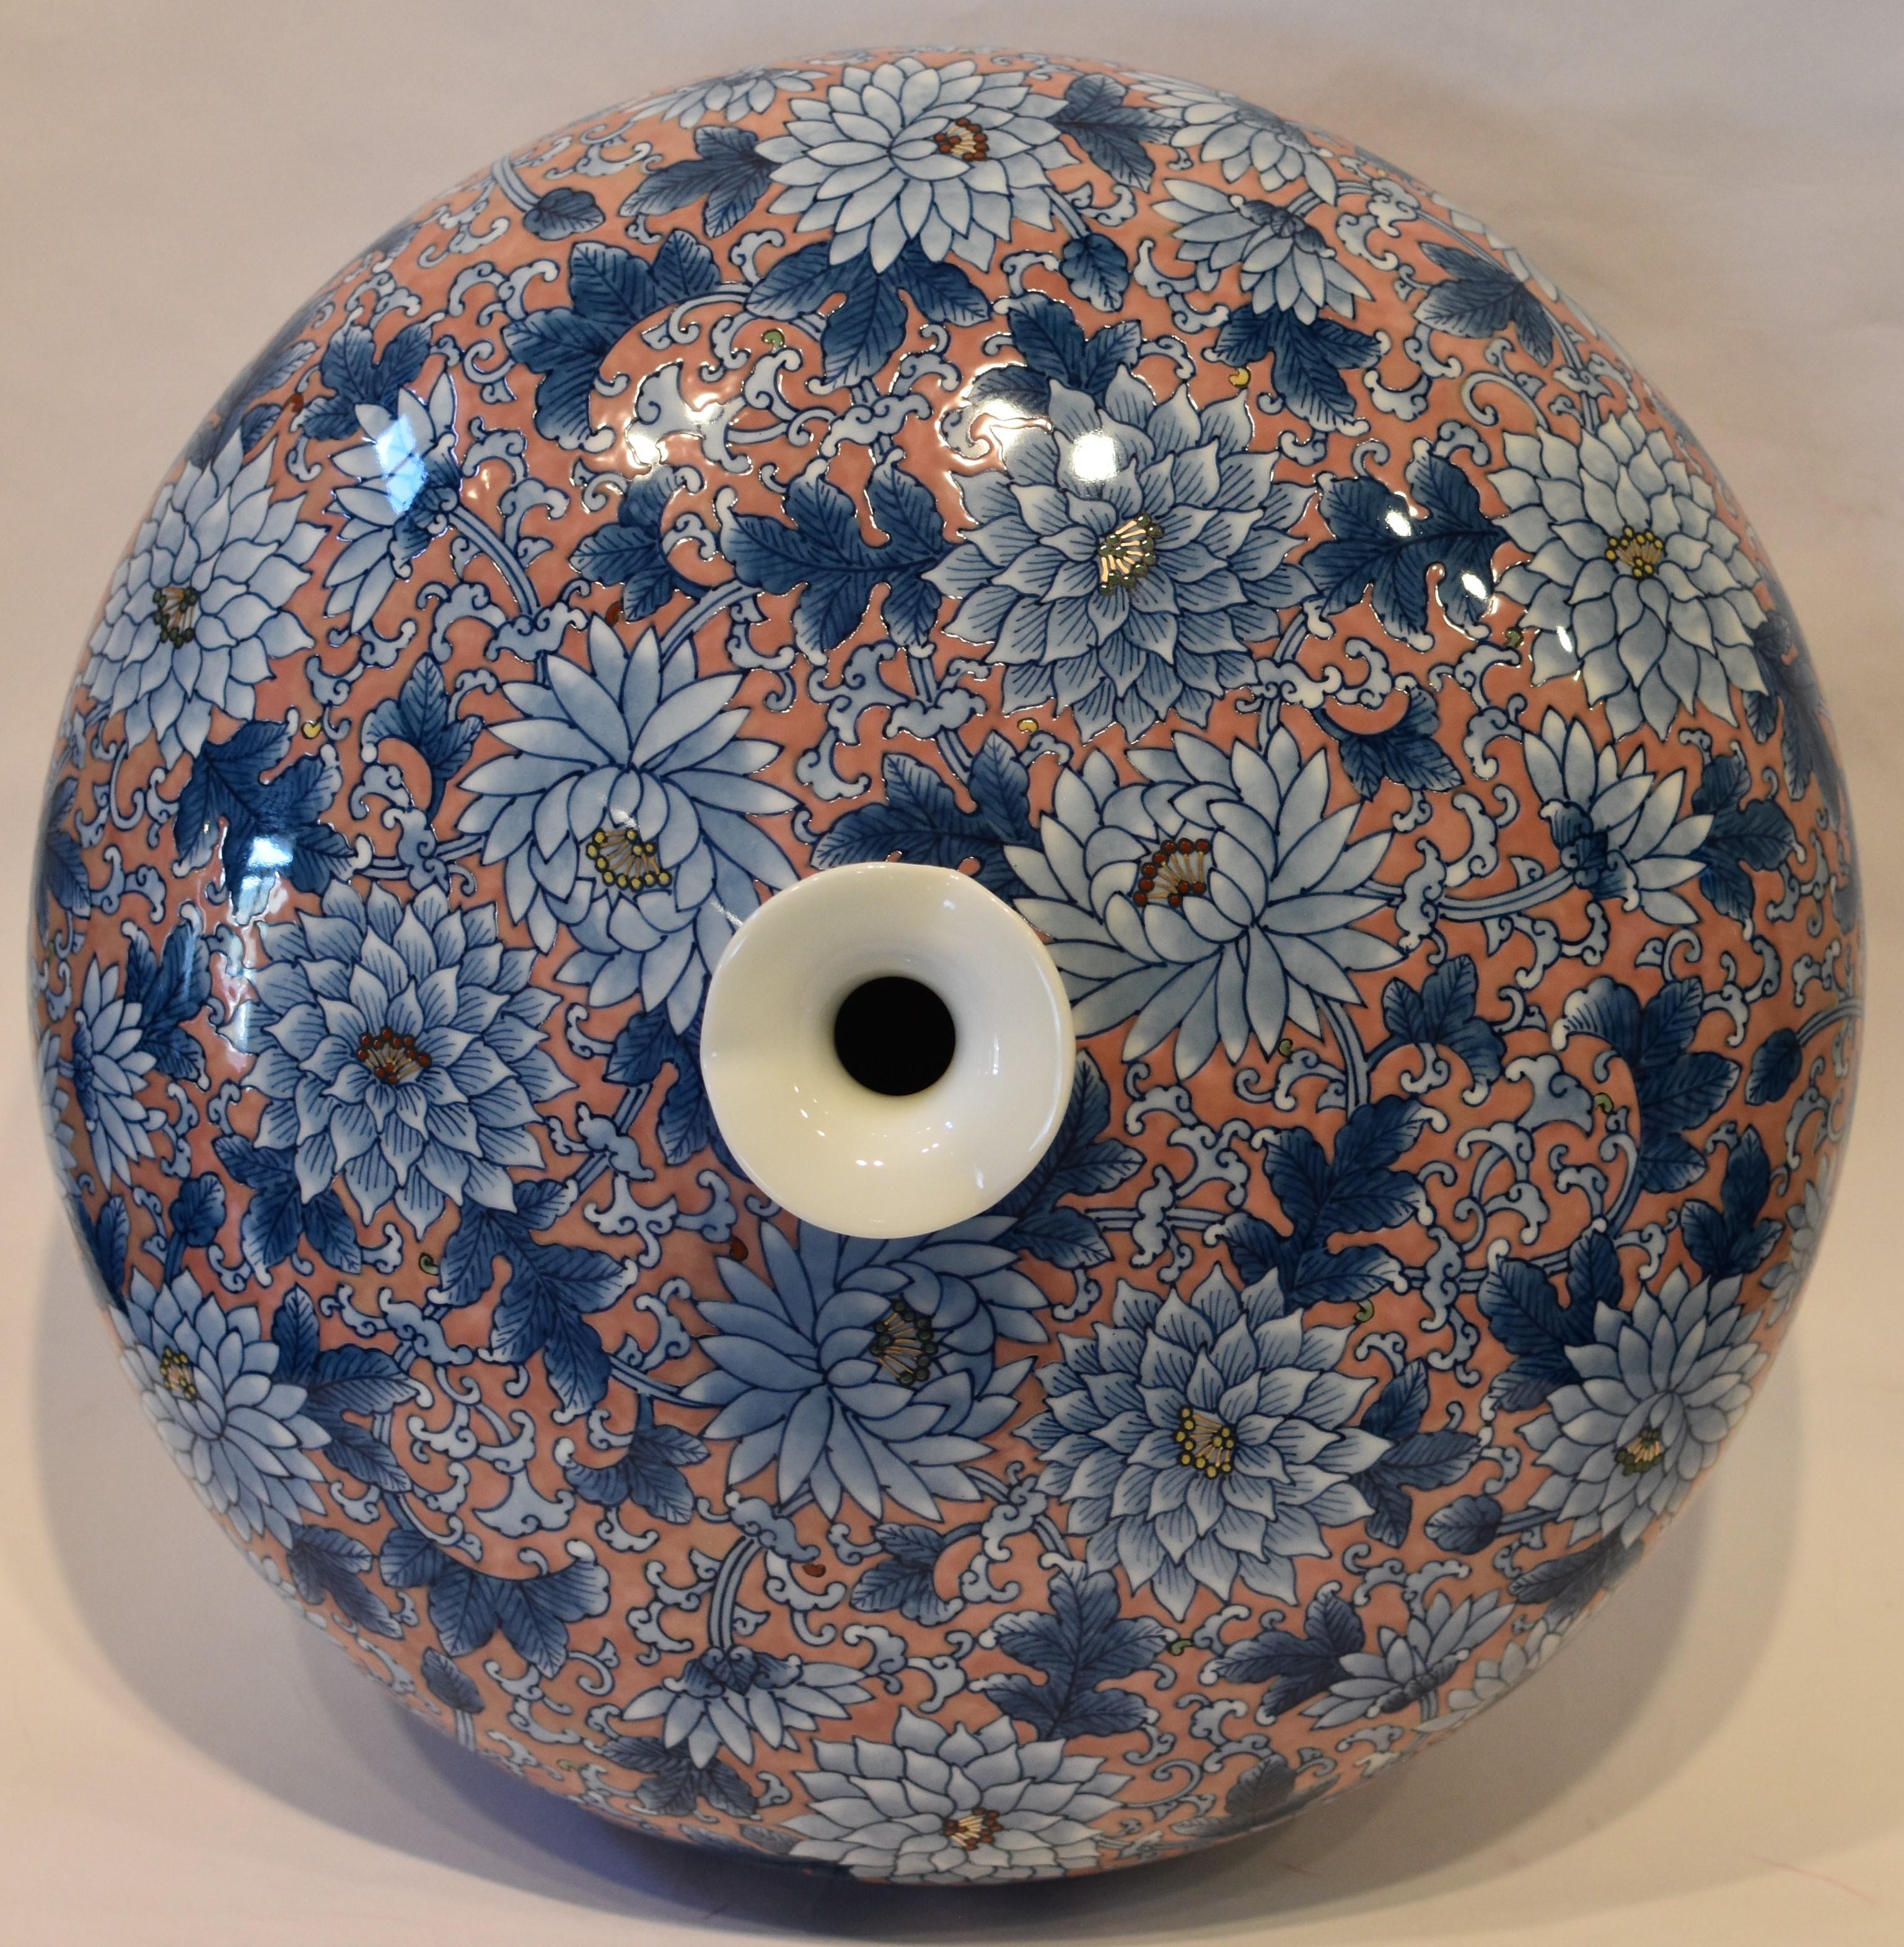 Unique large contemporary decorative porcelain vase, hand painted on the finest Arita porcelain boasting an exaggerated ovoid shape that provides the perfect canvas for a field of chrysanthemums in full bloom. Flowers done in shades of blue are set